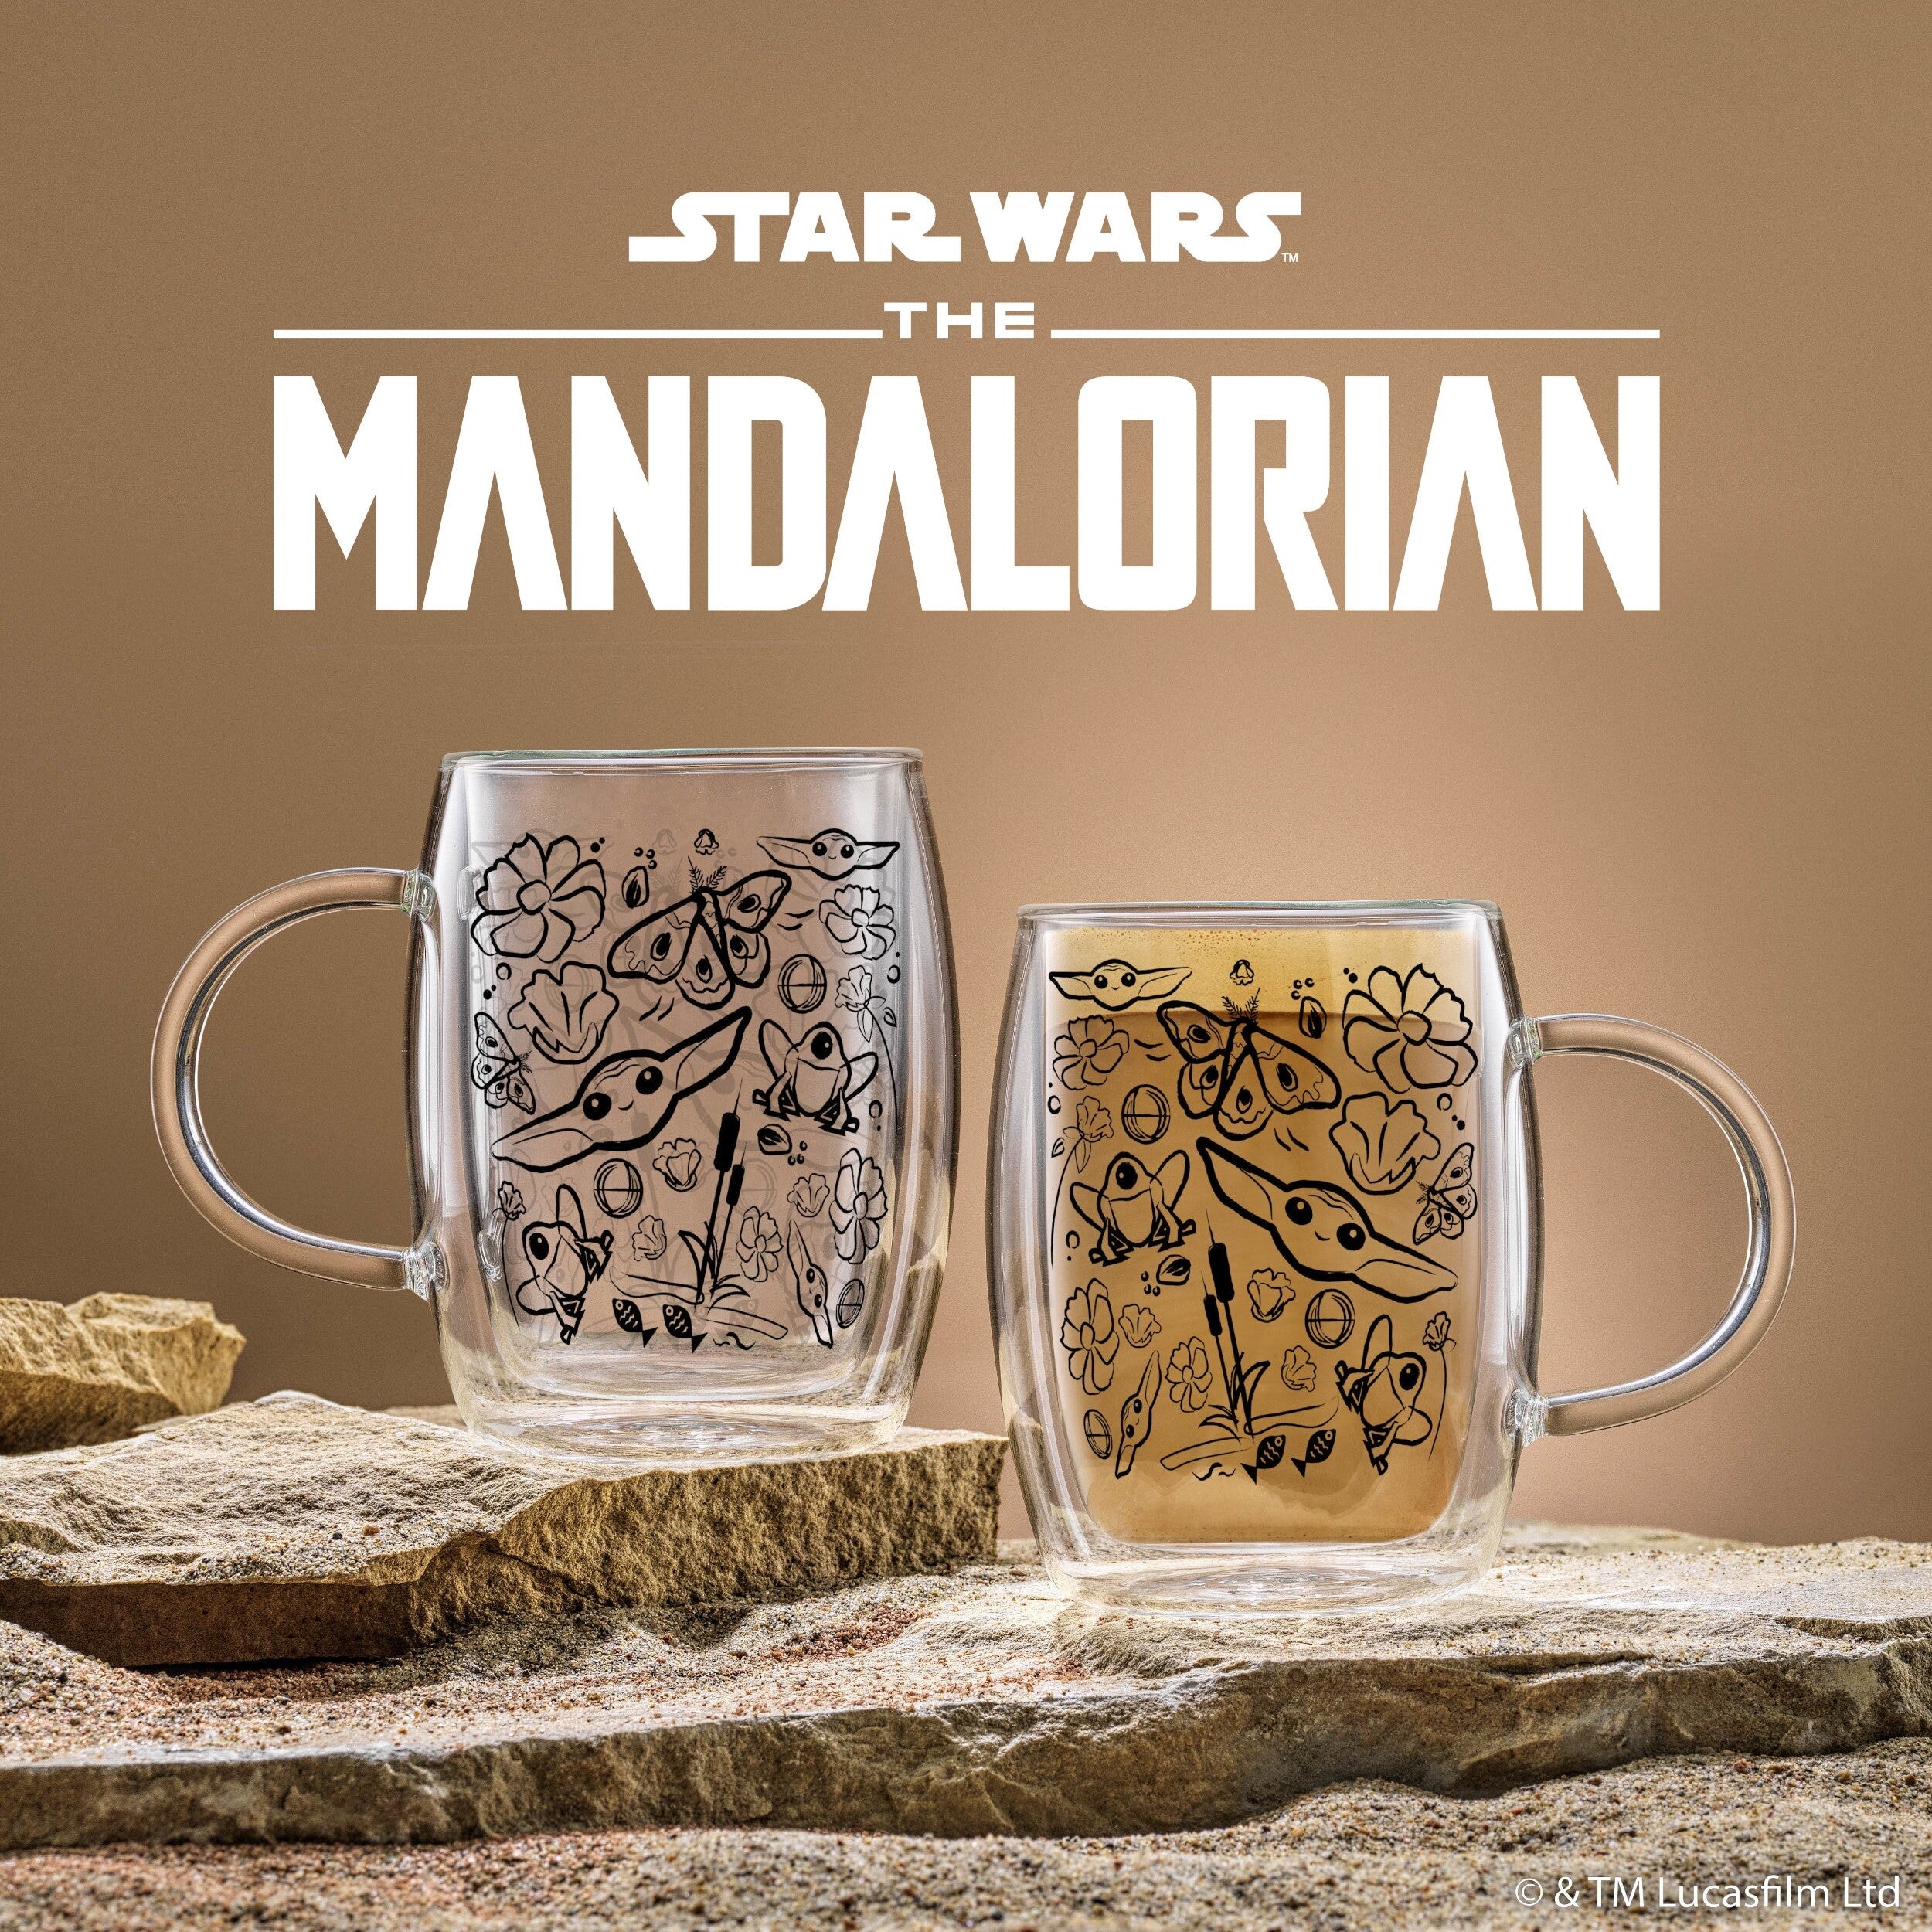 https://ak1.ostkcdn.com/images/products/is/images/direct/4f4a80a89ff2d88d8caa9d234971e0001af58c4d/Star-Wars-Mandalorian-The-Child-All-Around-Glass-Mugs-13.5-oz-Set-of-2.jpg